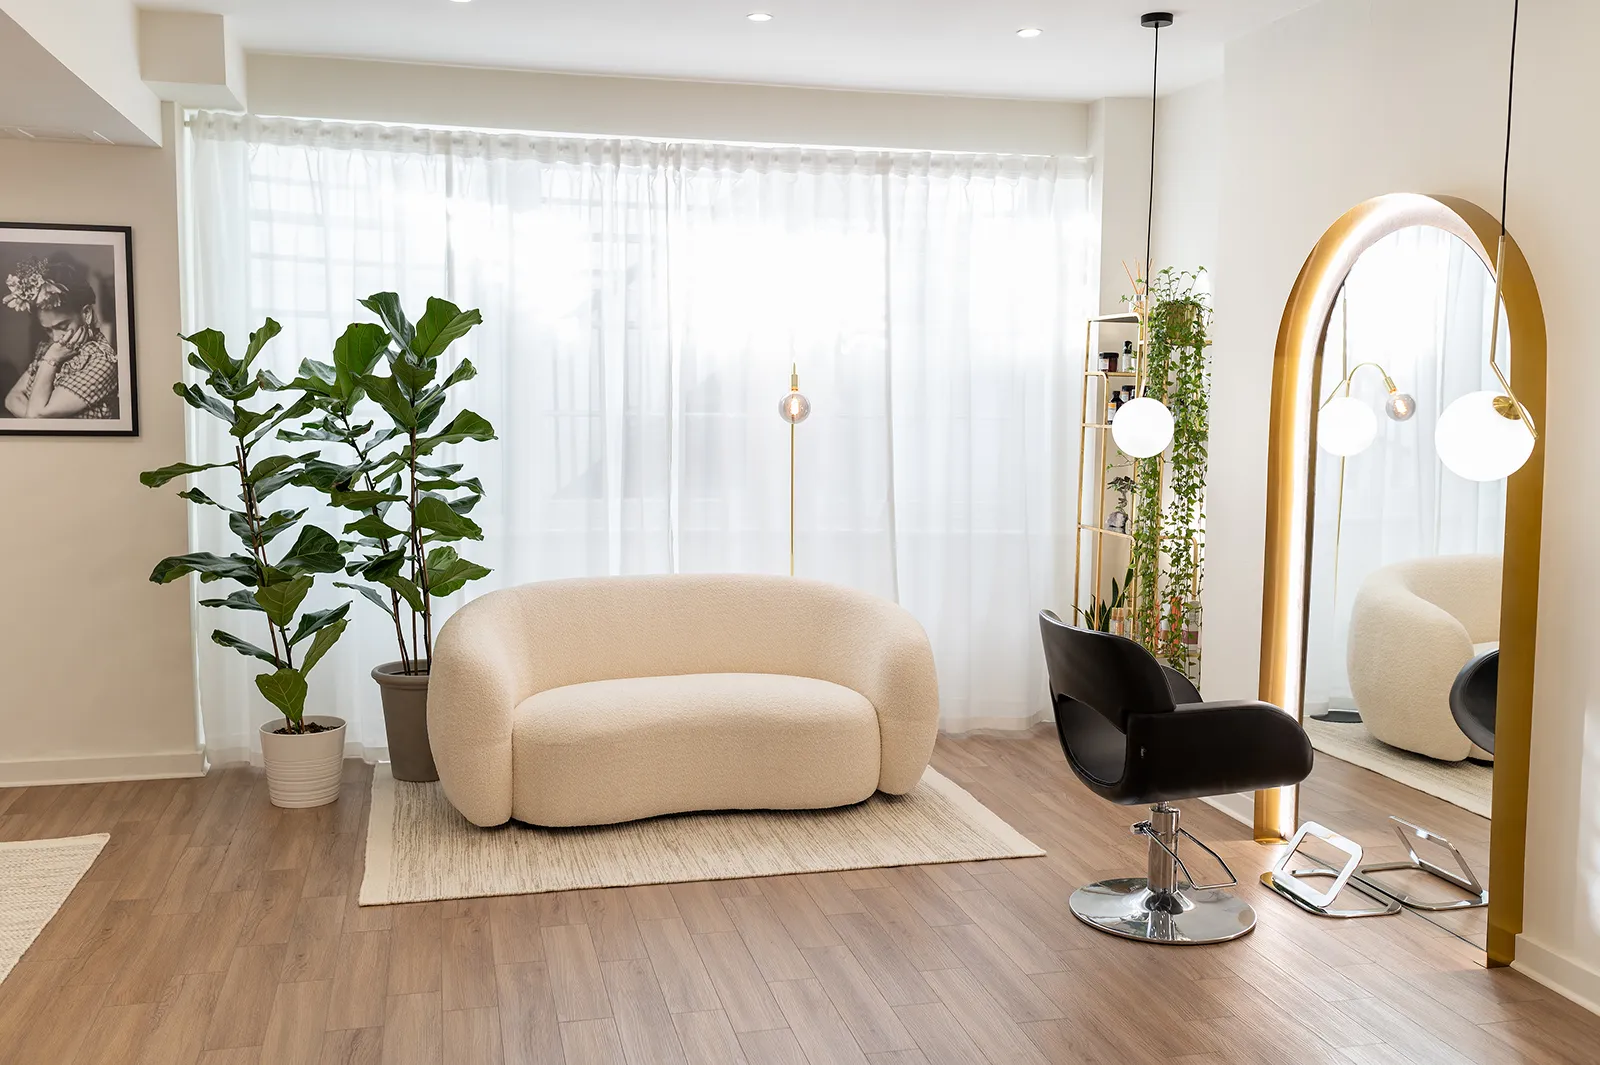 A chic and inviting hair salon lounge area with contemporary furniture and lush green plants, showcasing the comfortable and stylish environment at the best hair salon in Islington.